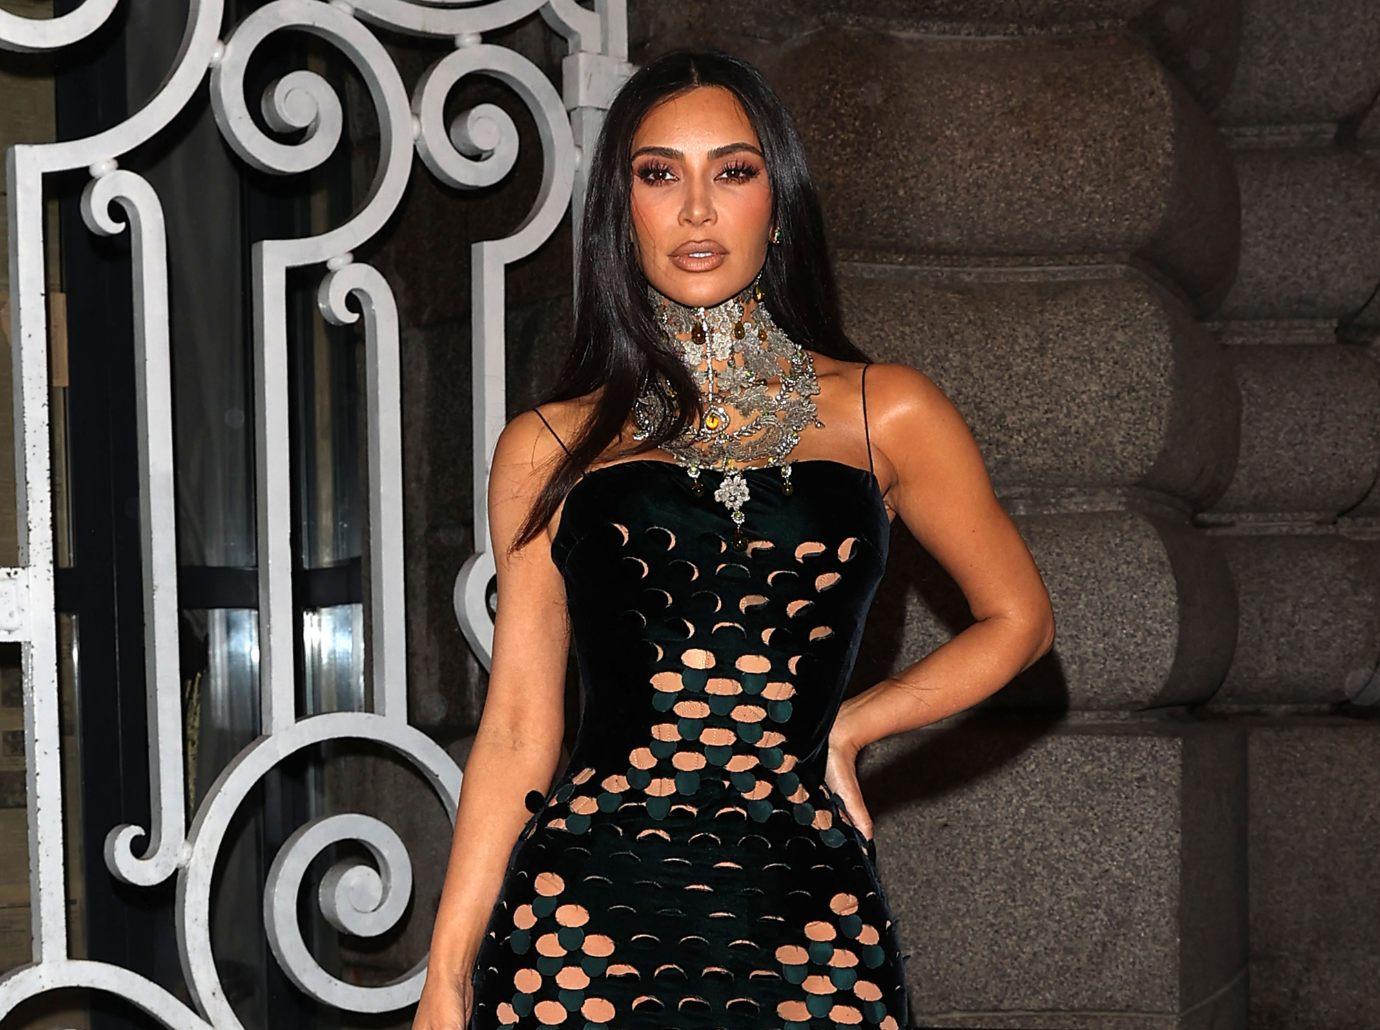 Kim Kardashian ditches her bra and underwear for see-through outfit on Vegas  trip in raunchy new photos